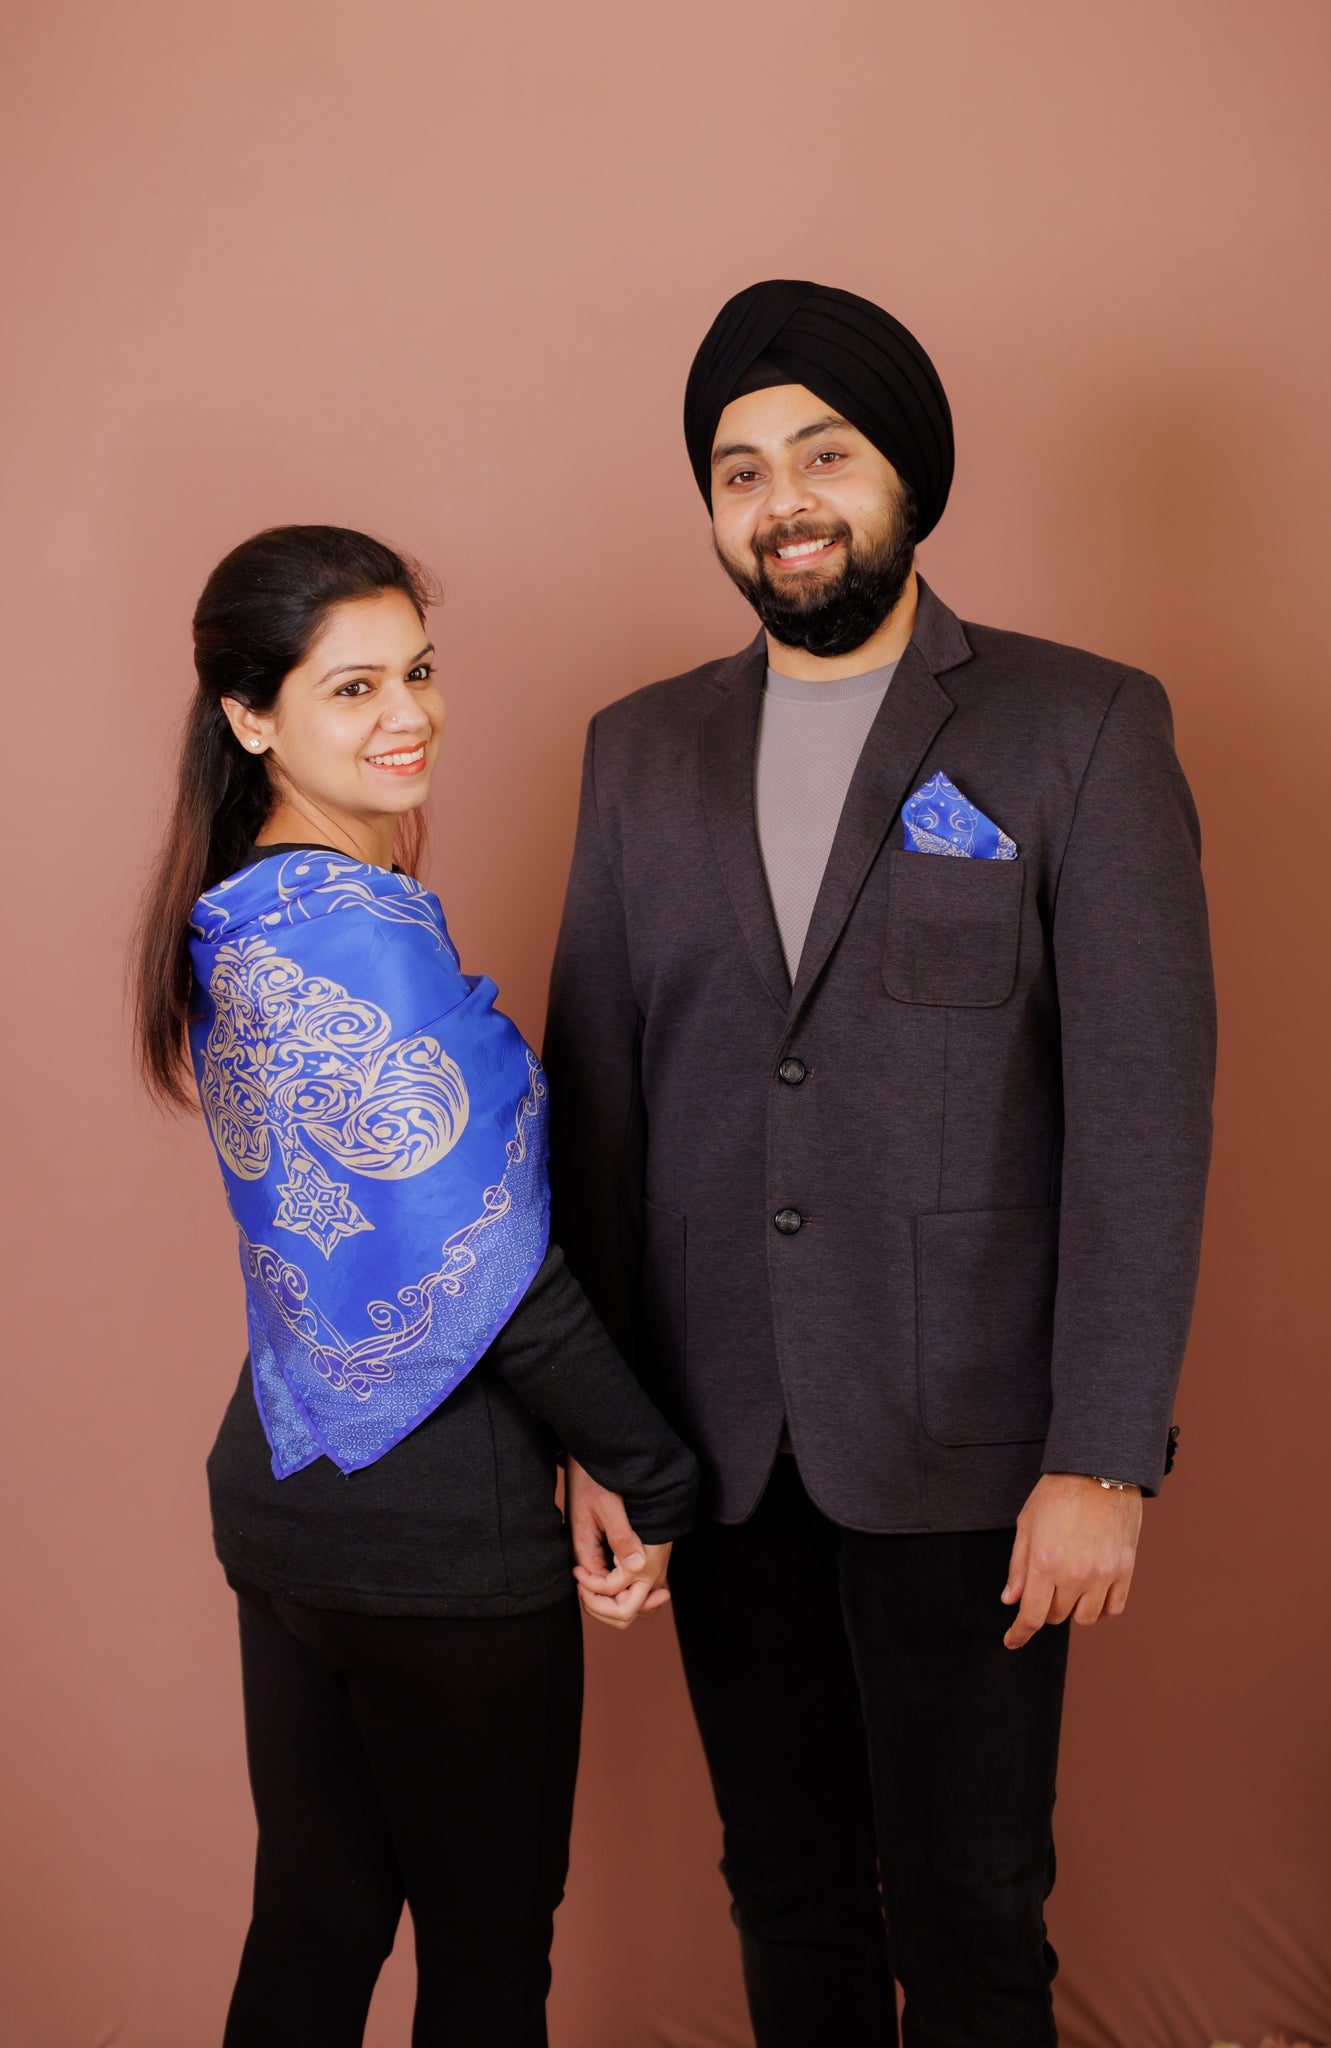 Royal Spade Pocket Square & Scarf for Couples - Combo Gift